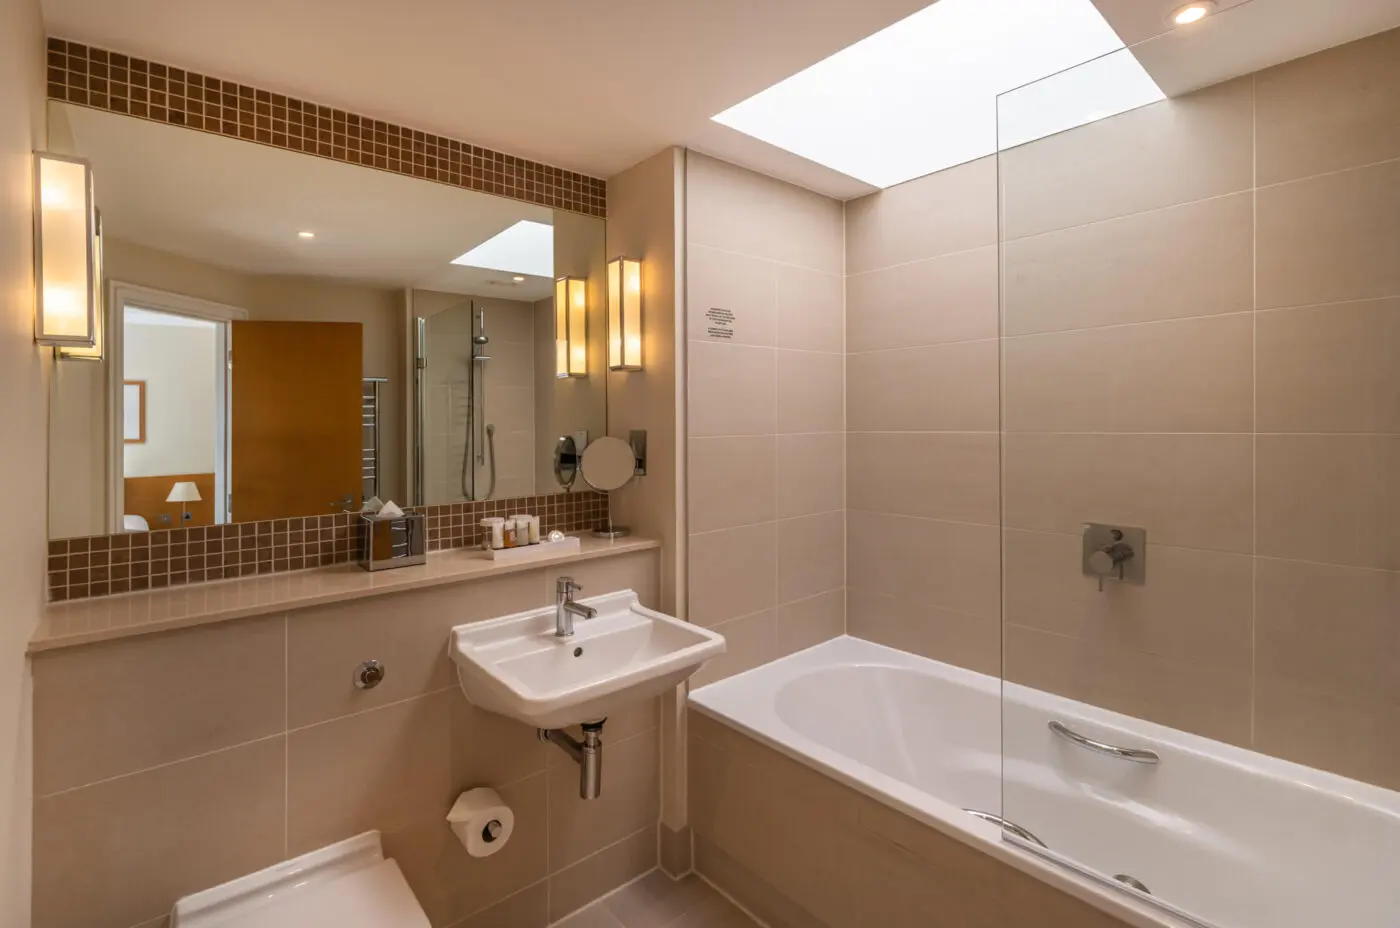 A superior bathroom with a large built in mirror and bathtub, located in Kensington.